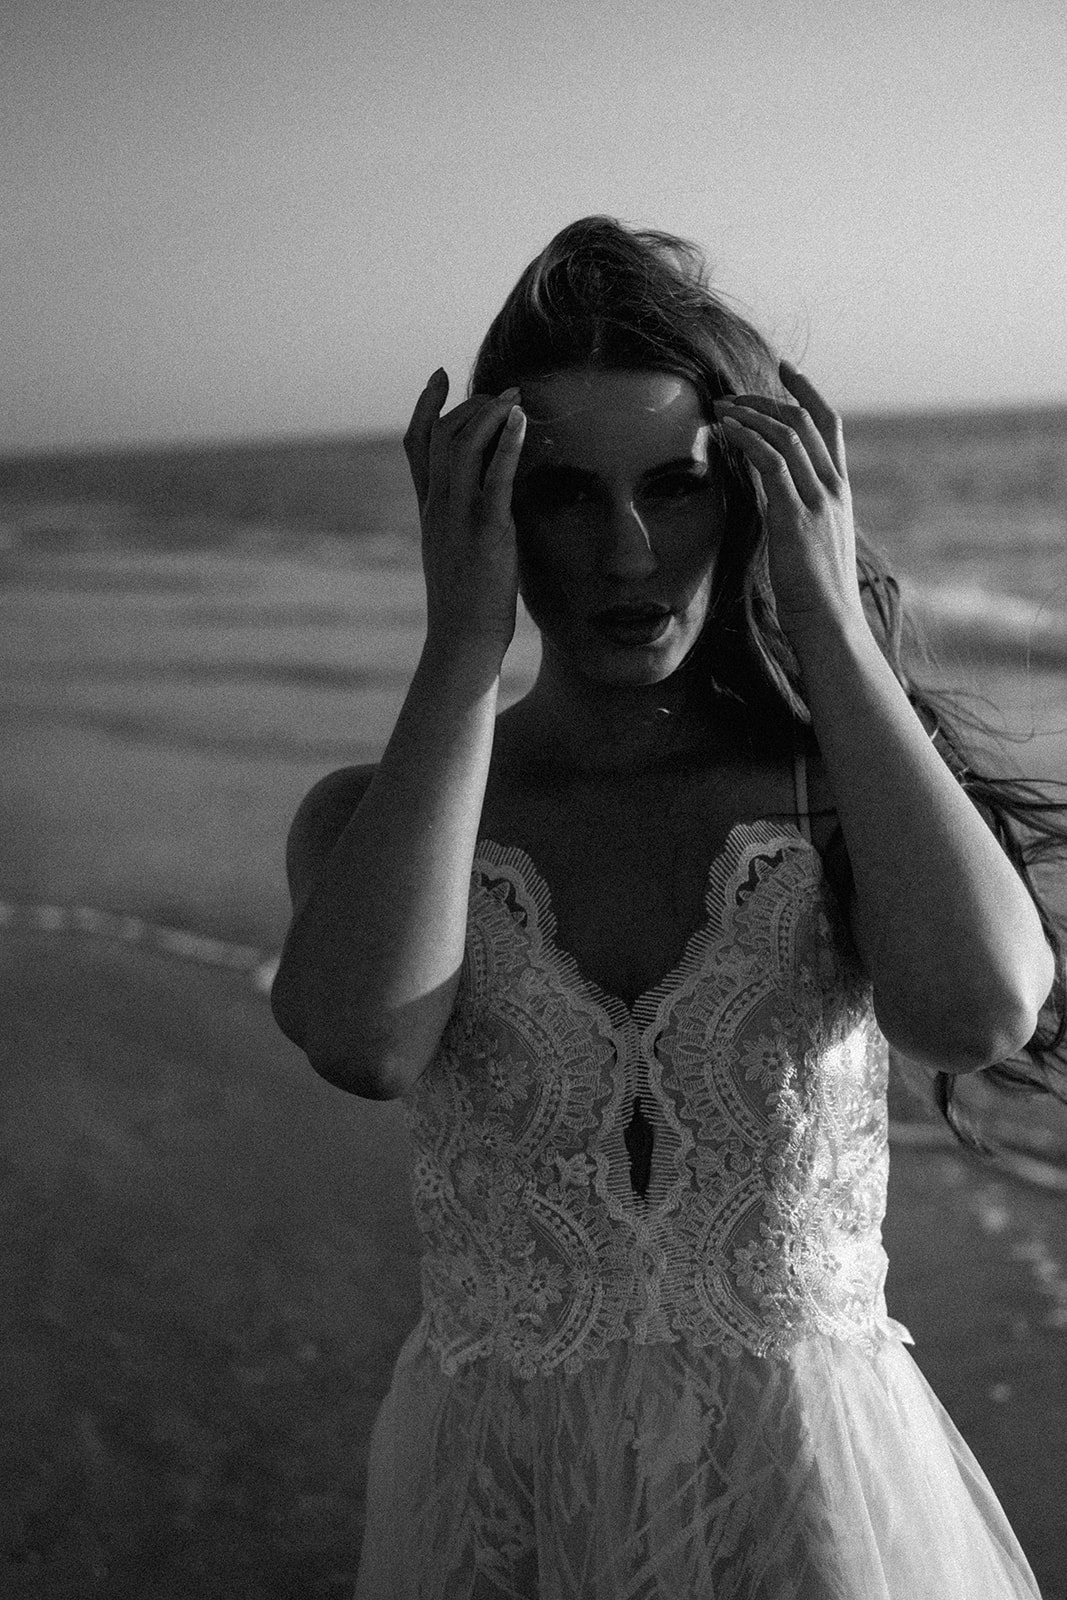 Sunset Clearwater Beach Bridal Session in Florida